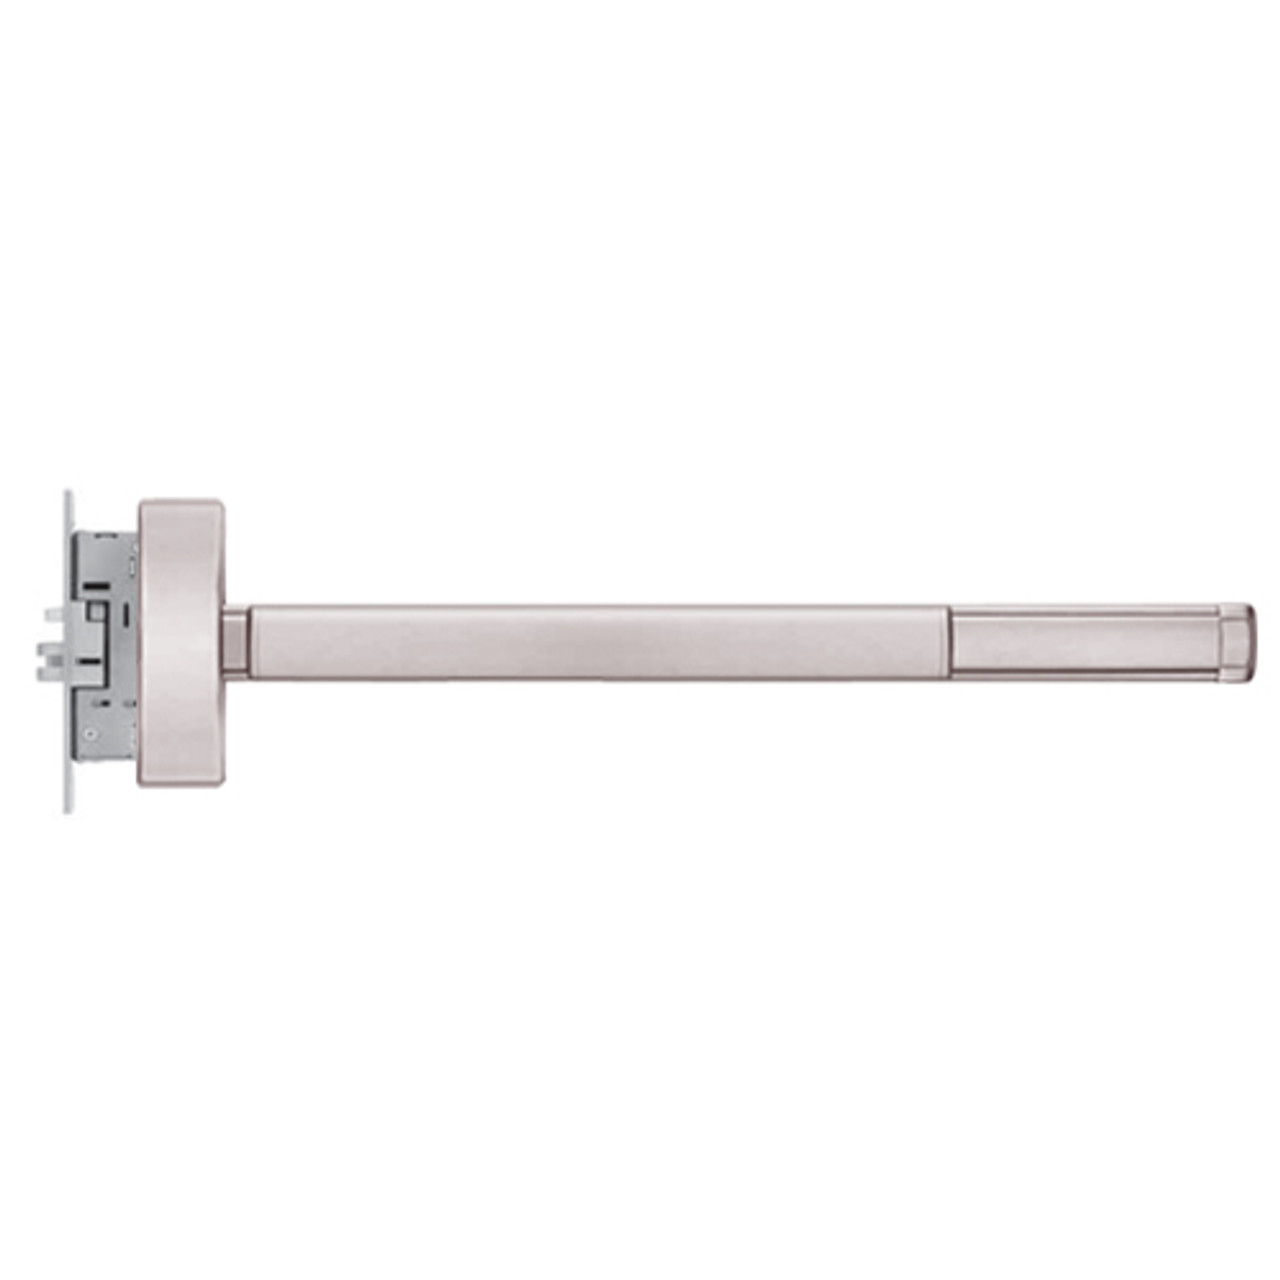 TS2305-LHR-628-36 PHI 2300 Series Apex Mortise Exit Device with Touchbar Monitoring Switch Prepped for Key Controls Thumb Piece in Satin Aluminum Finish